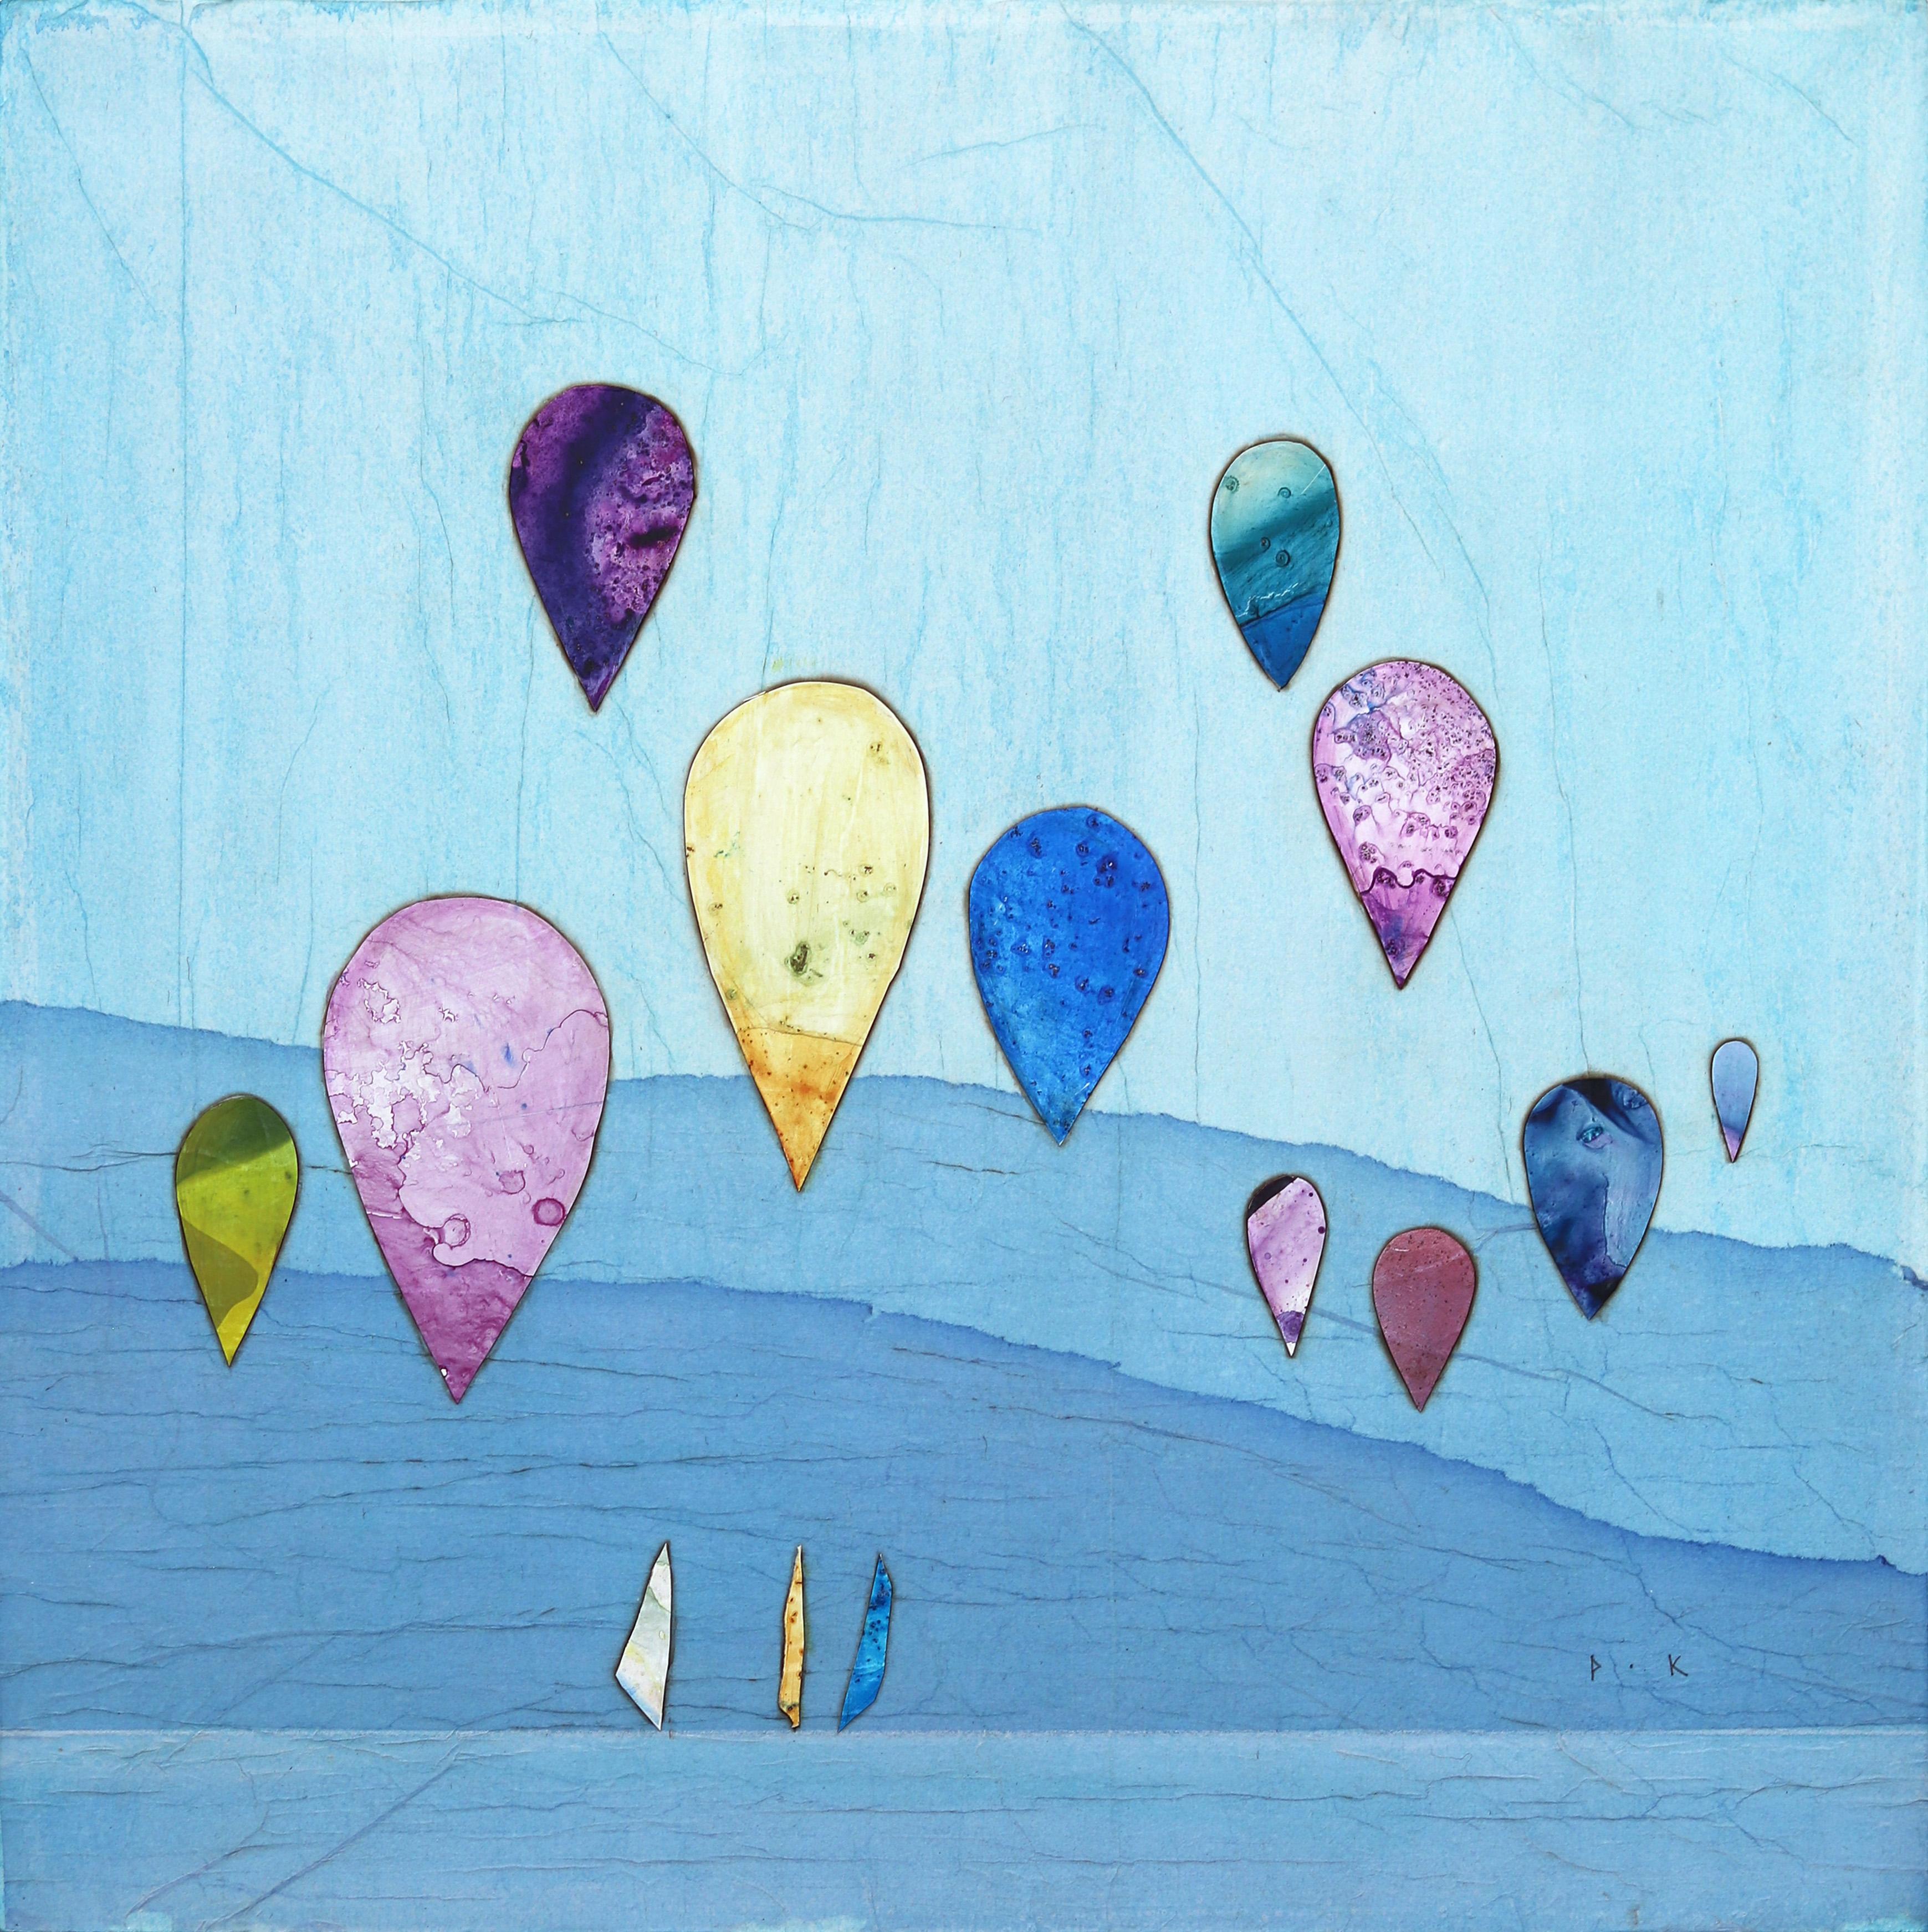 Peter Kuttner Abstract Painting - Our Hangout I - Original Boho Minimalist Abstract Landscape Balloon Artwork